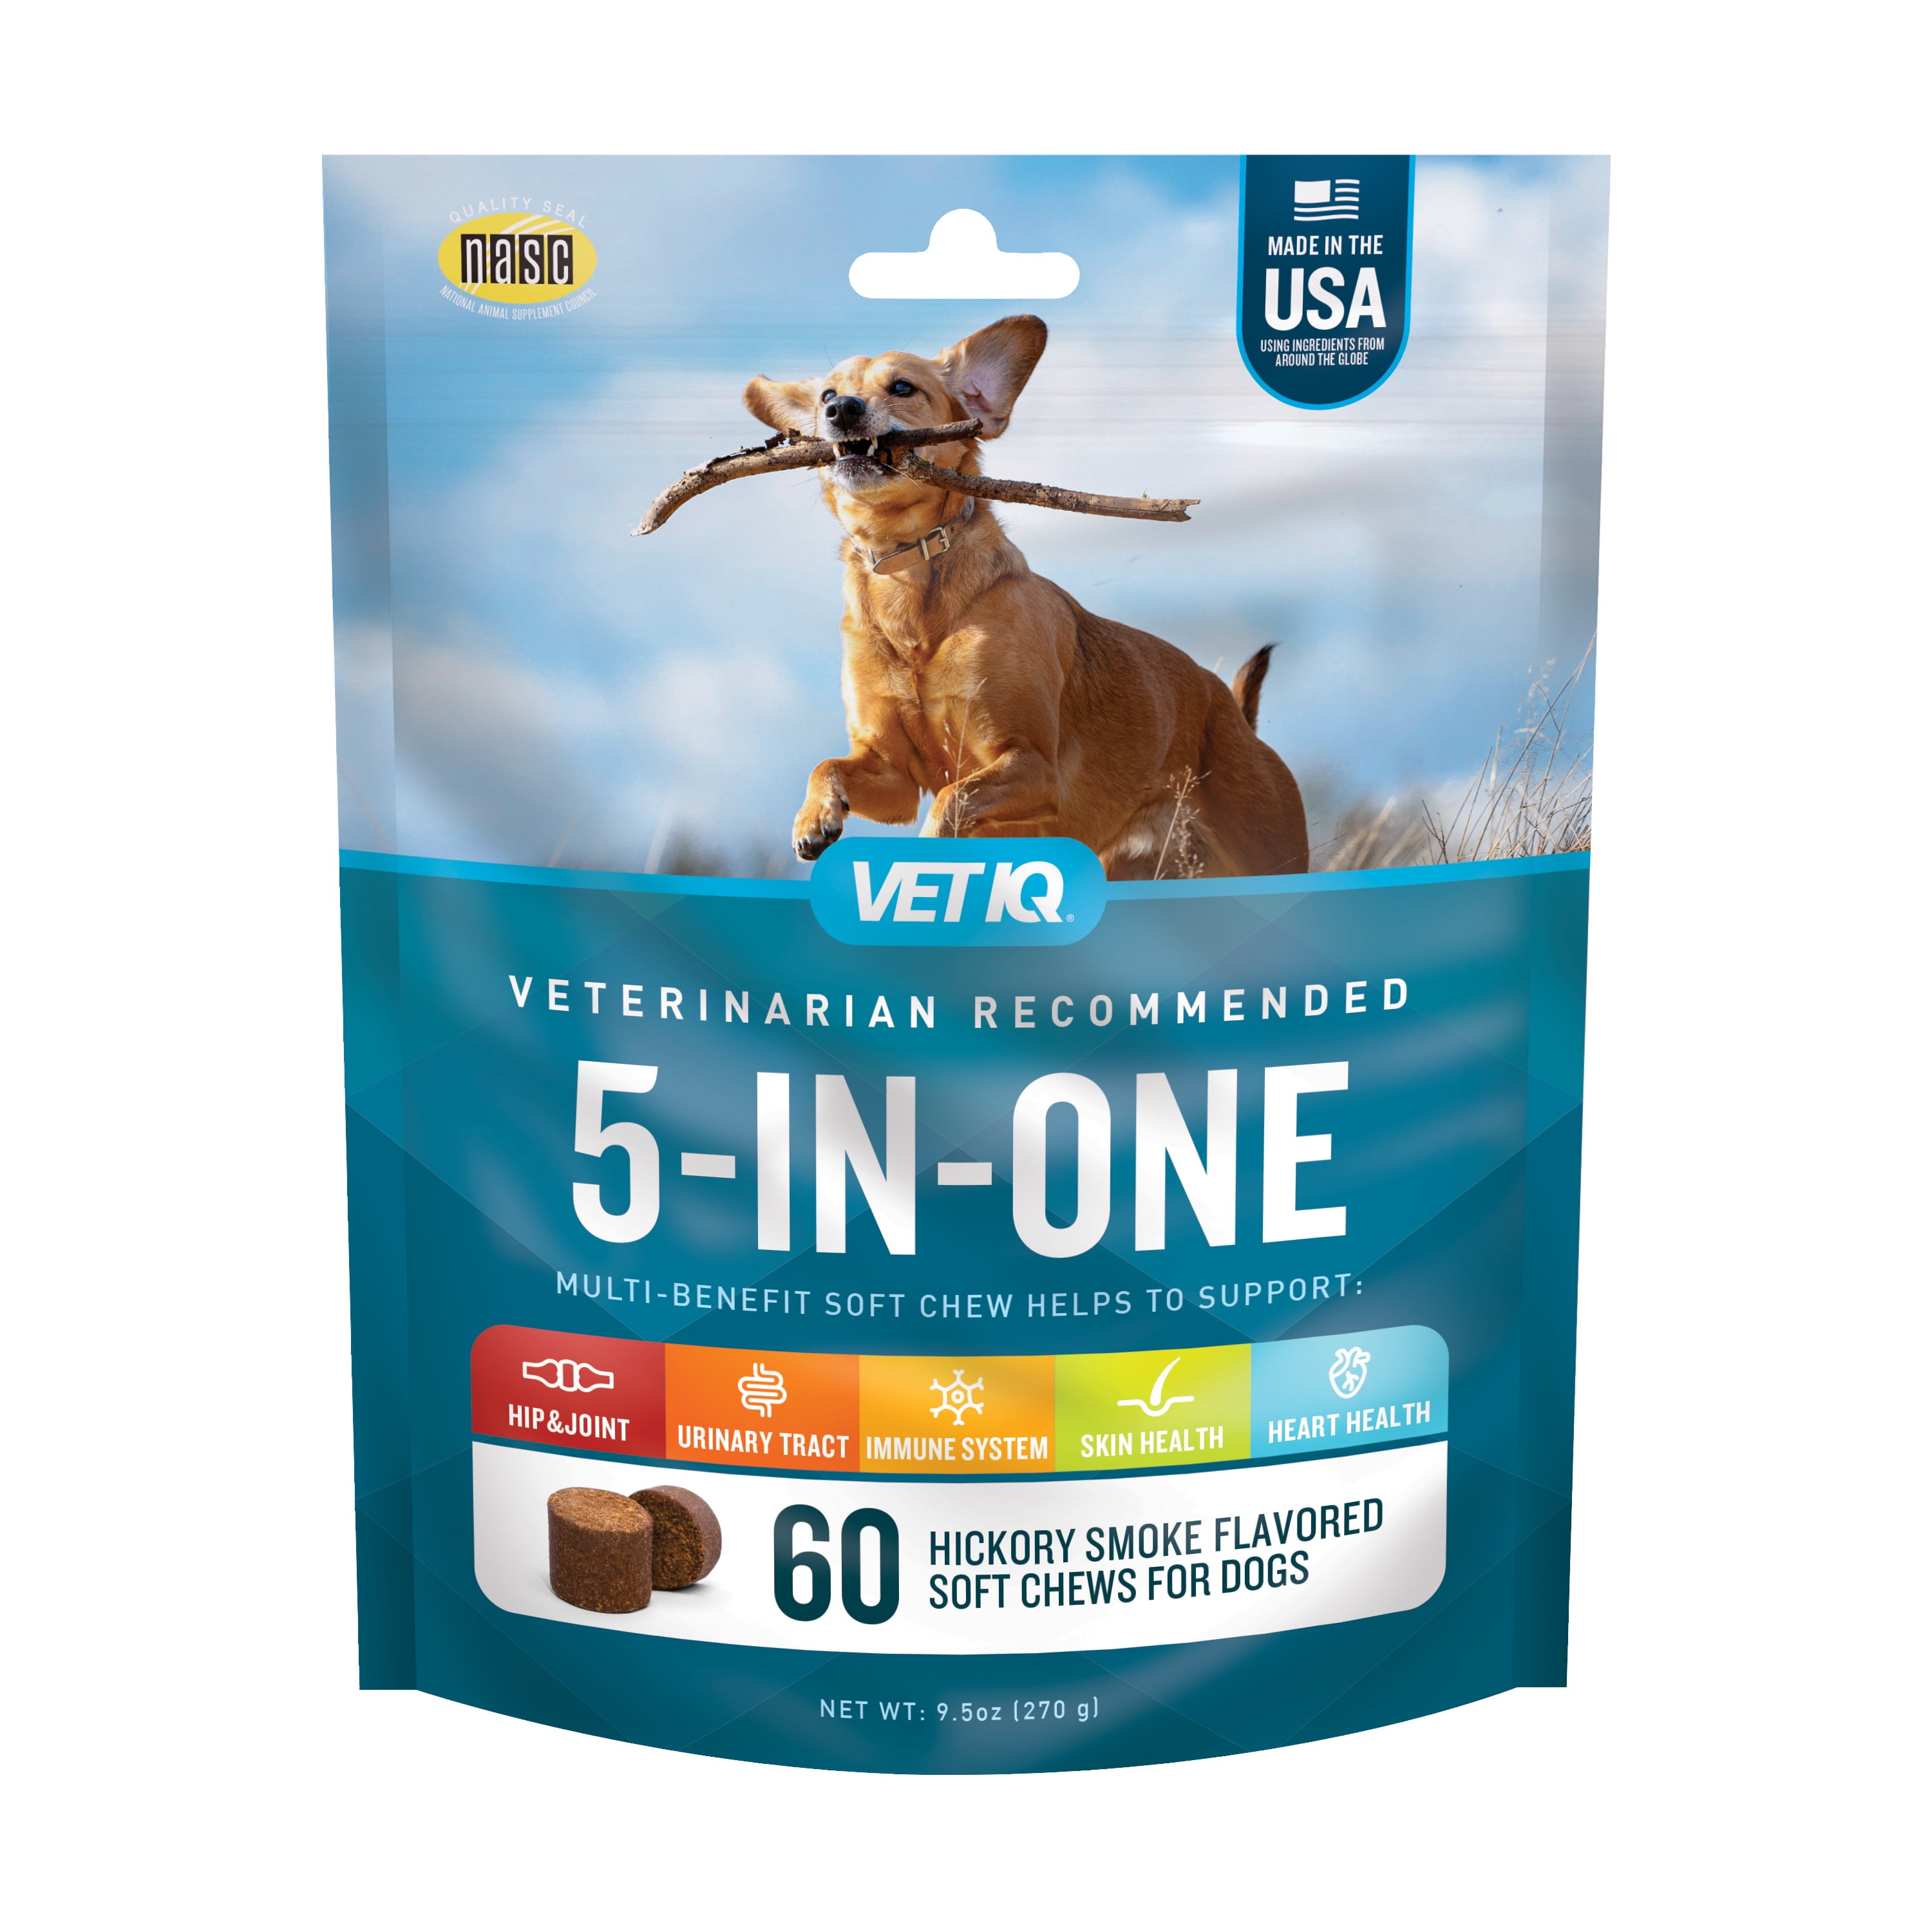 VetIQ 5-in-One Multi-Benefit Supplement Soft Chew for Dogs, 60 Count, 9.5 oz